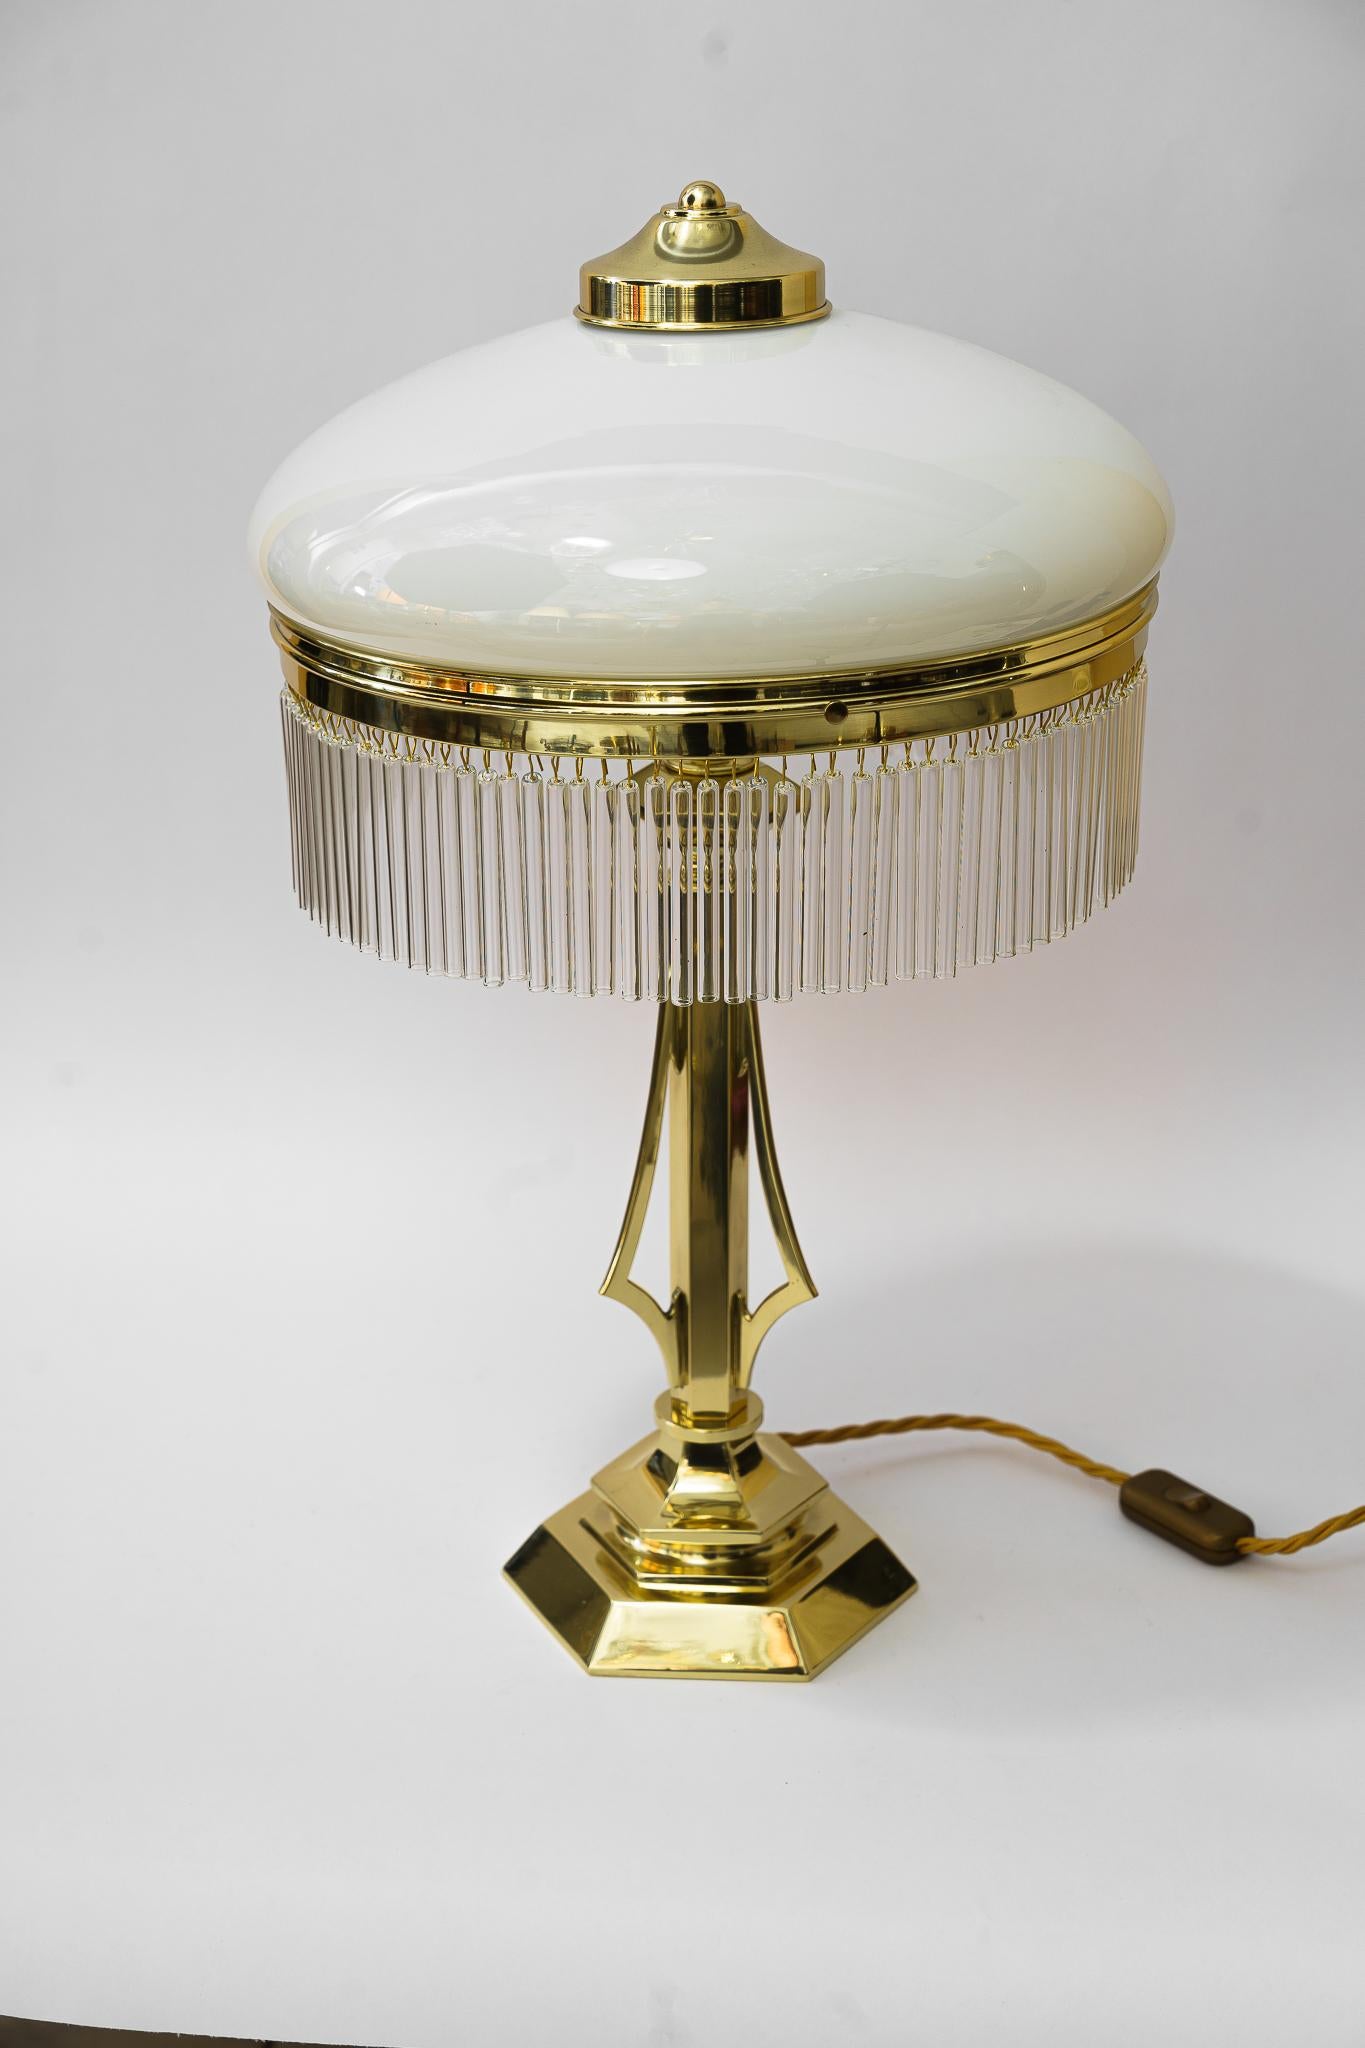 Art Deco Table lamp vienna around 1920s
The glass sticks are replaced ( new )
Brass polished and stove enameled.